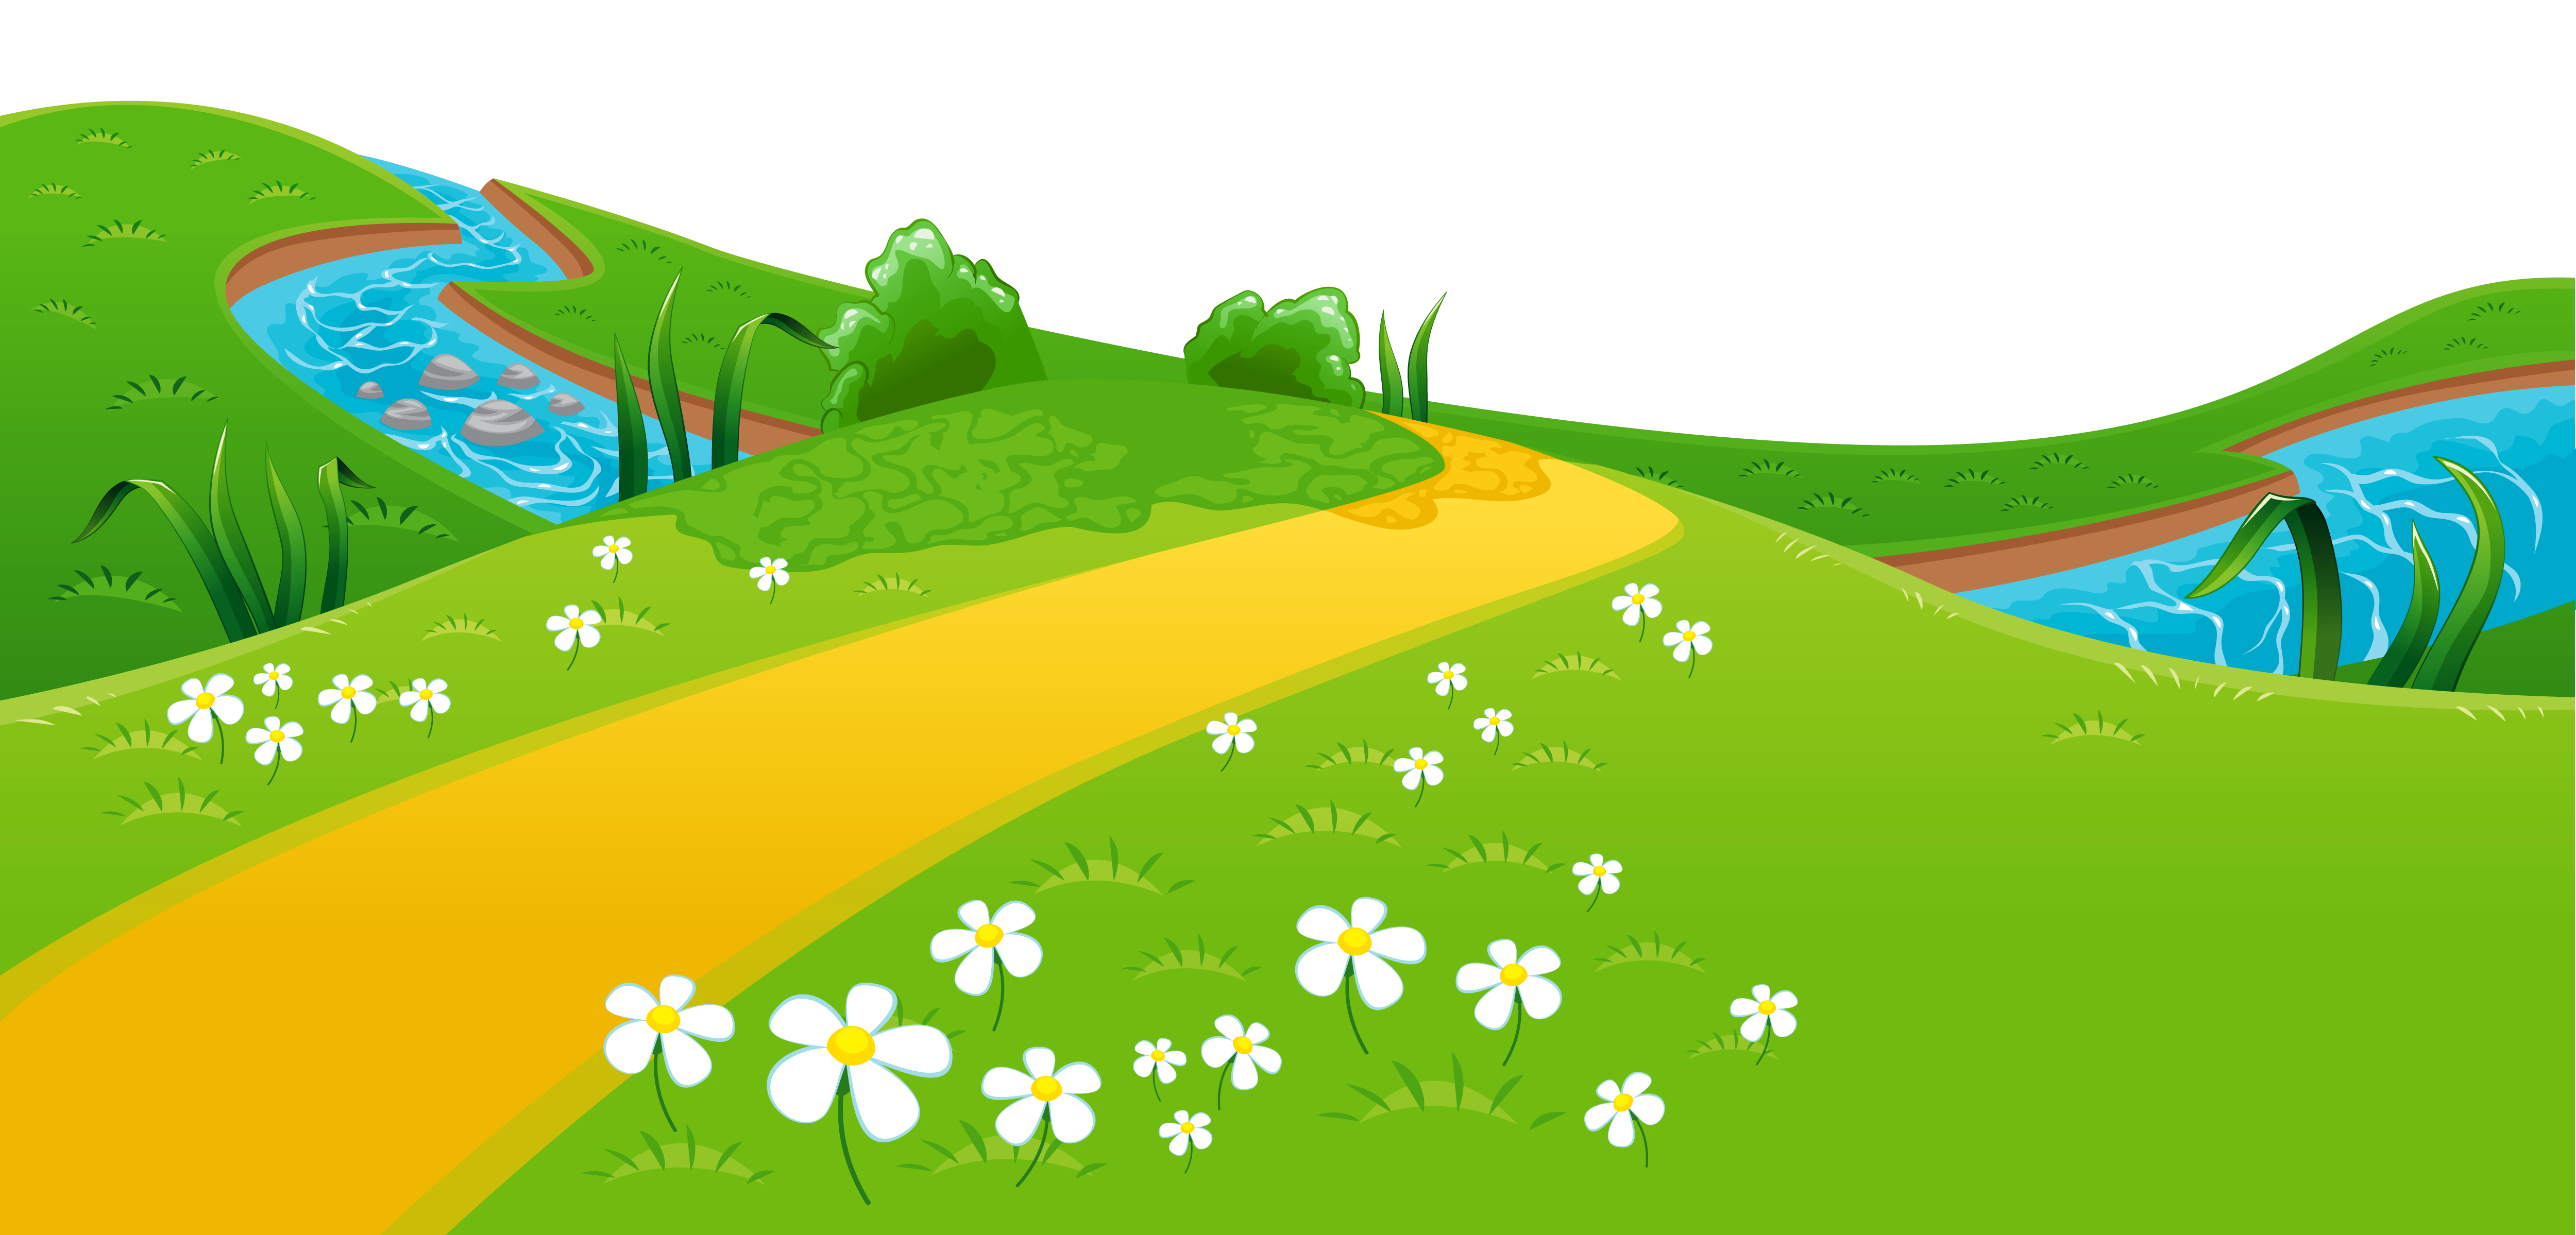 Hill clipart green meadows. Meadow and river ground